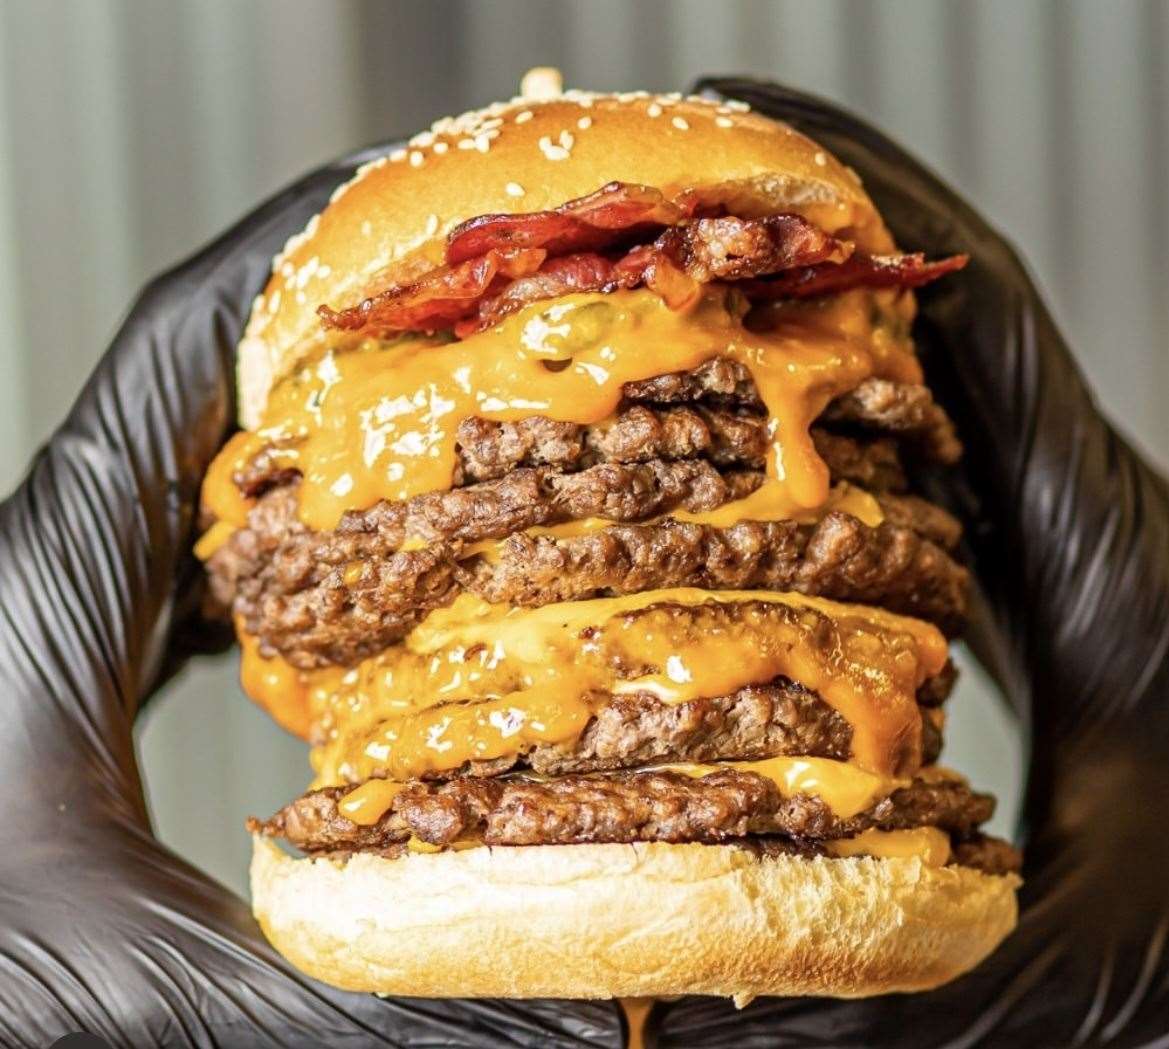 It is known for its Angus beef burgers. Picture: Instagram @12thstreetburgers